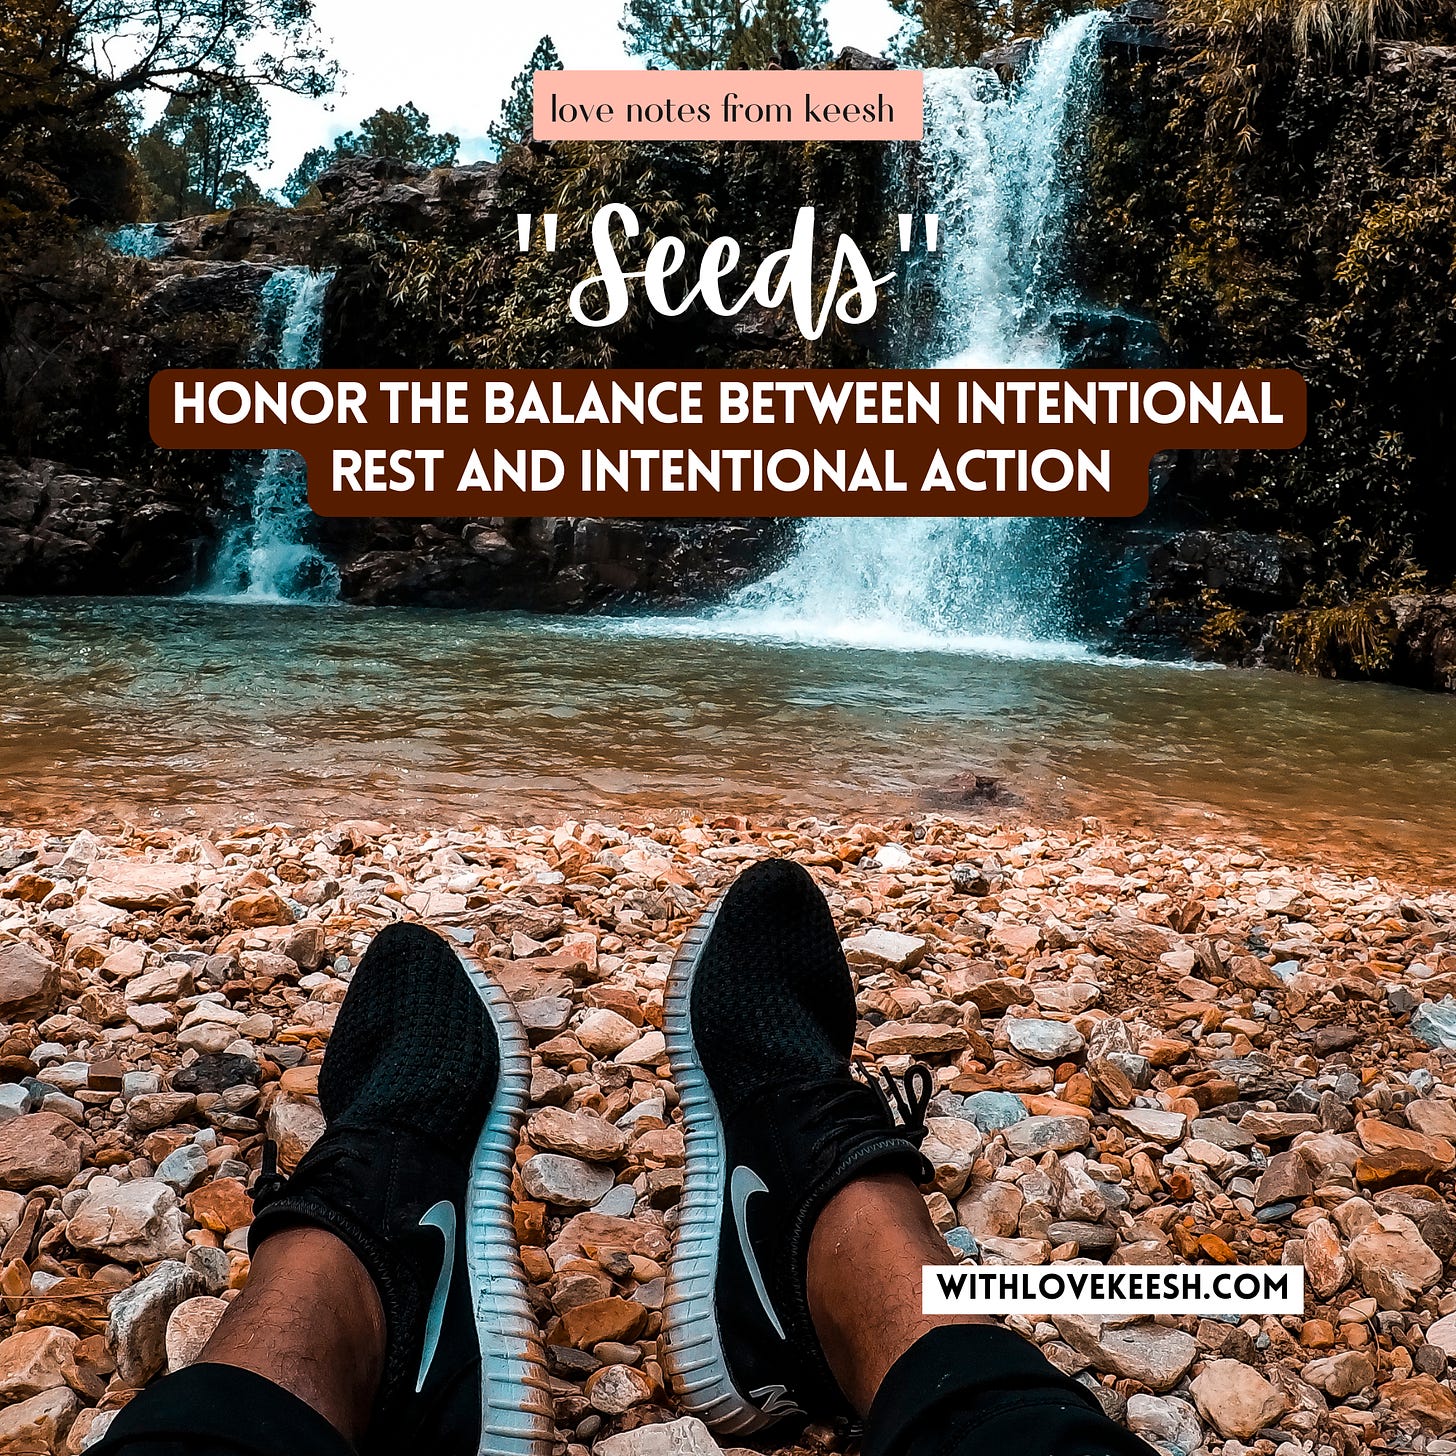 "Seeds" Honor the balance between intentional rest and intentional action 